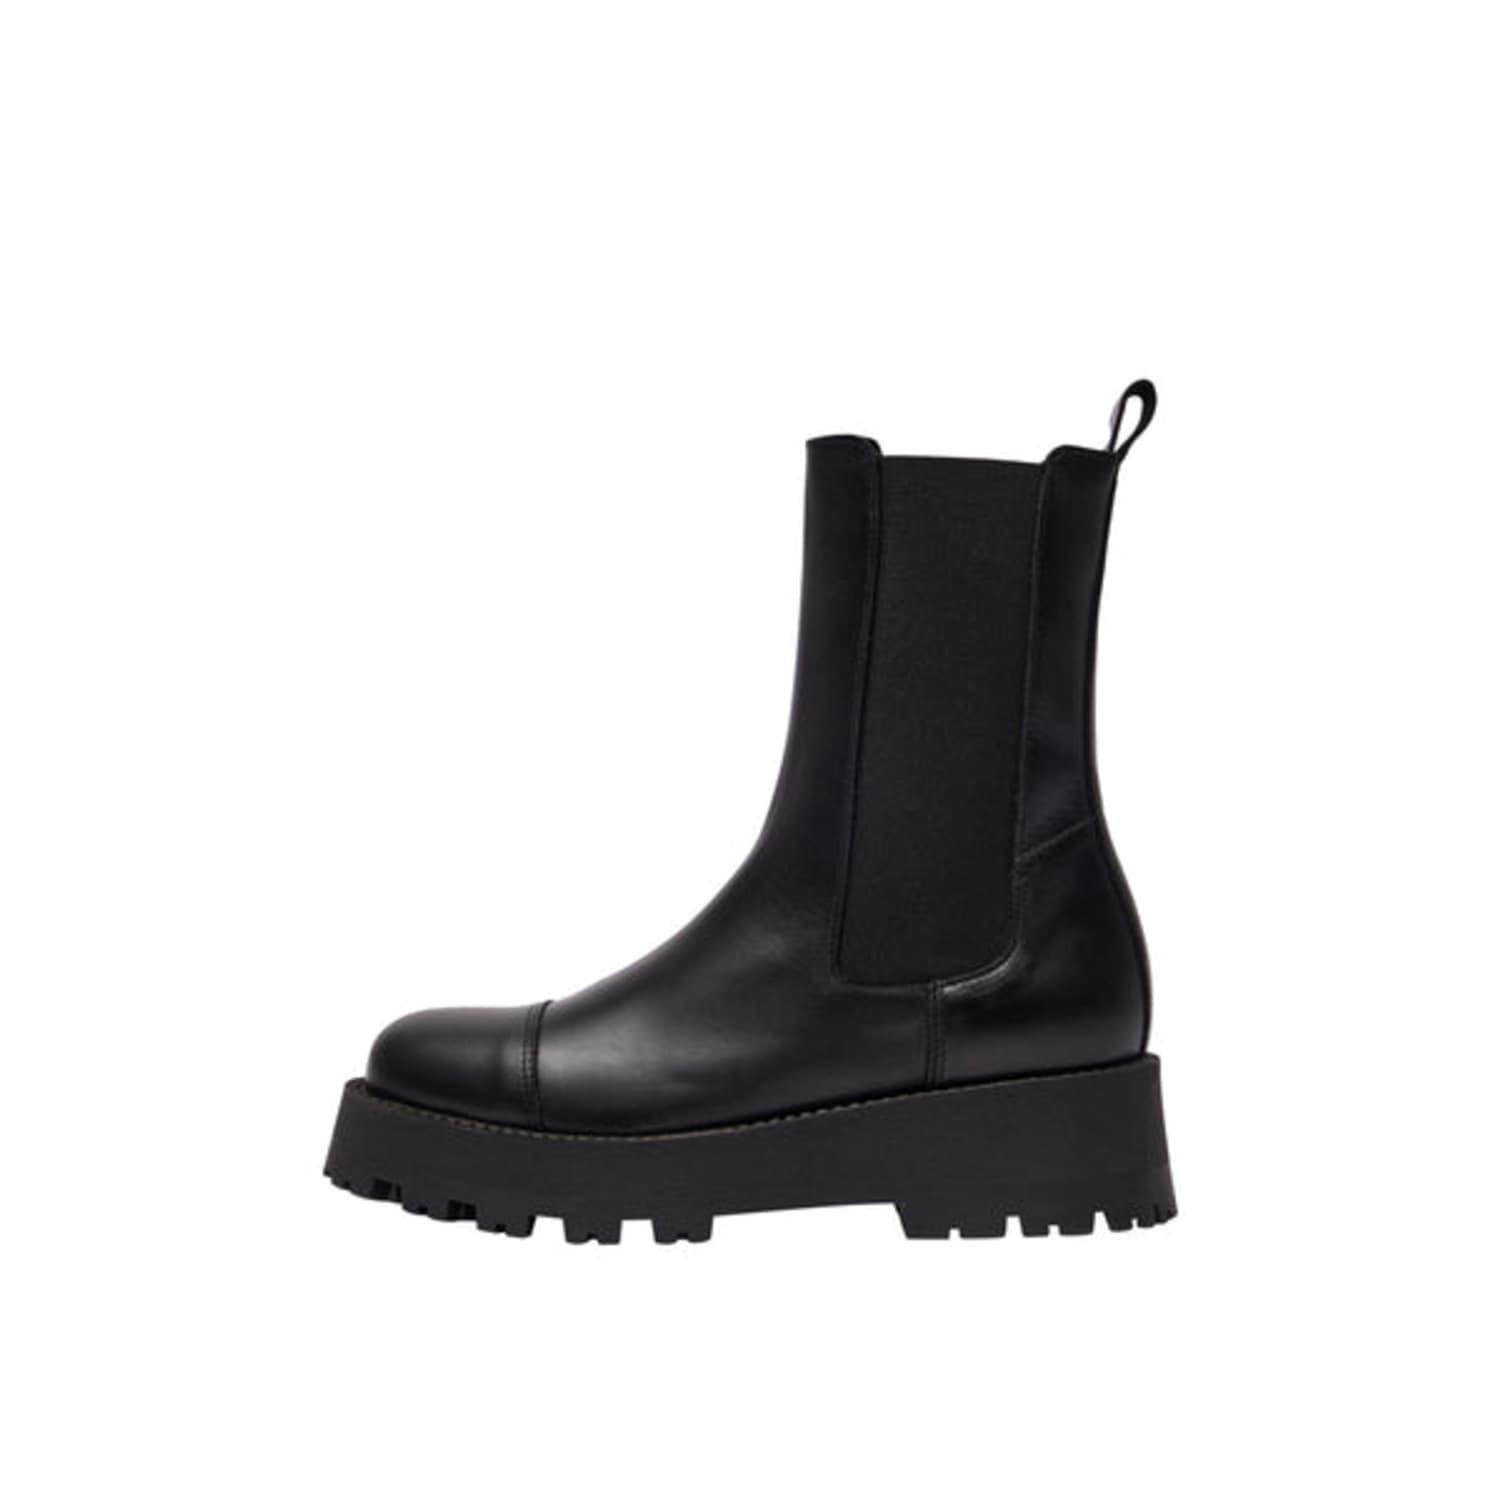 SELECTED Cora Boots in Black | Lyst